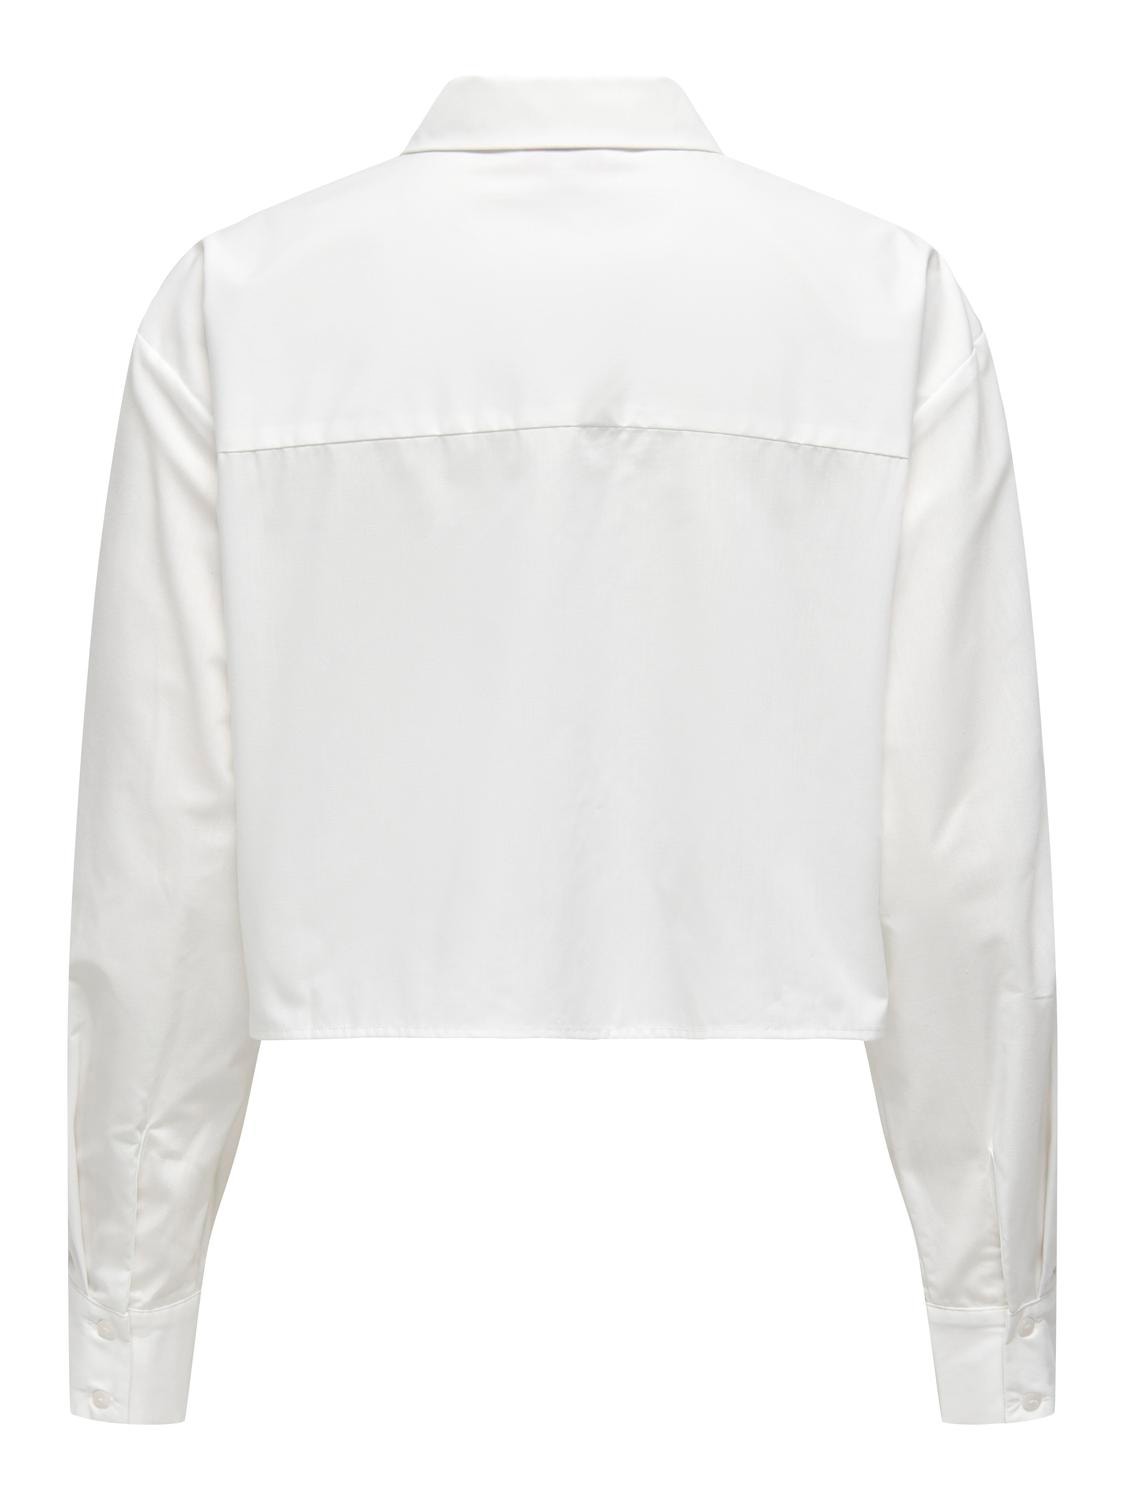 ONLY Cropped shirt -White - 15327688